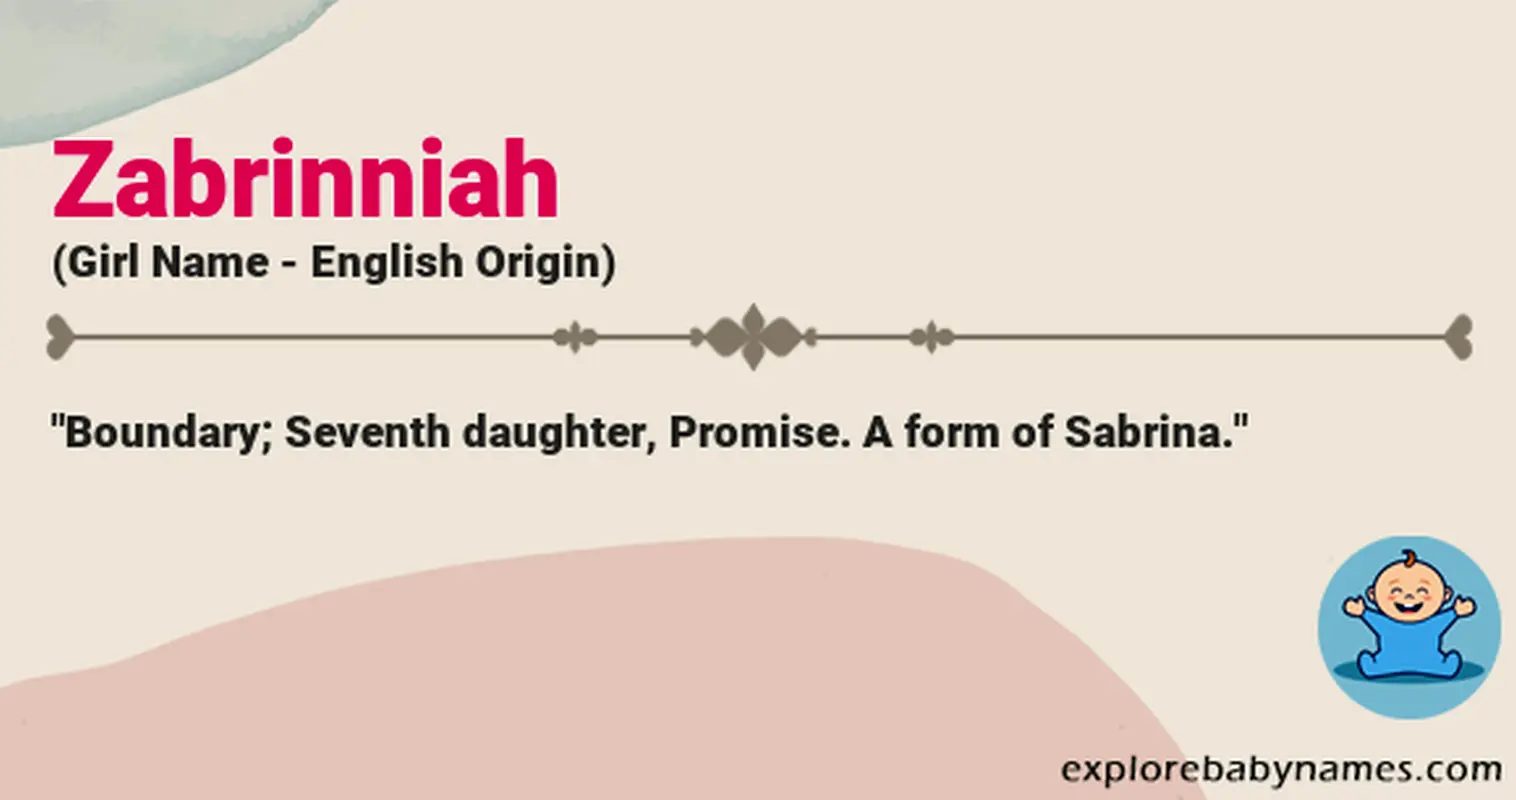 Meaning of Zabrinniah